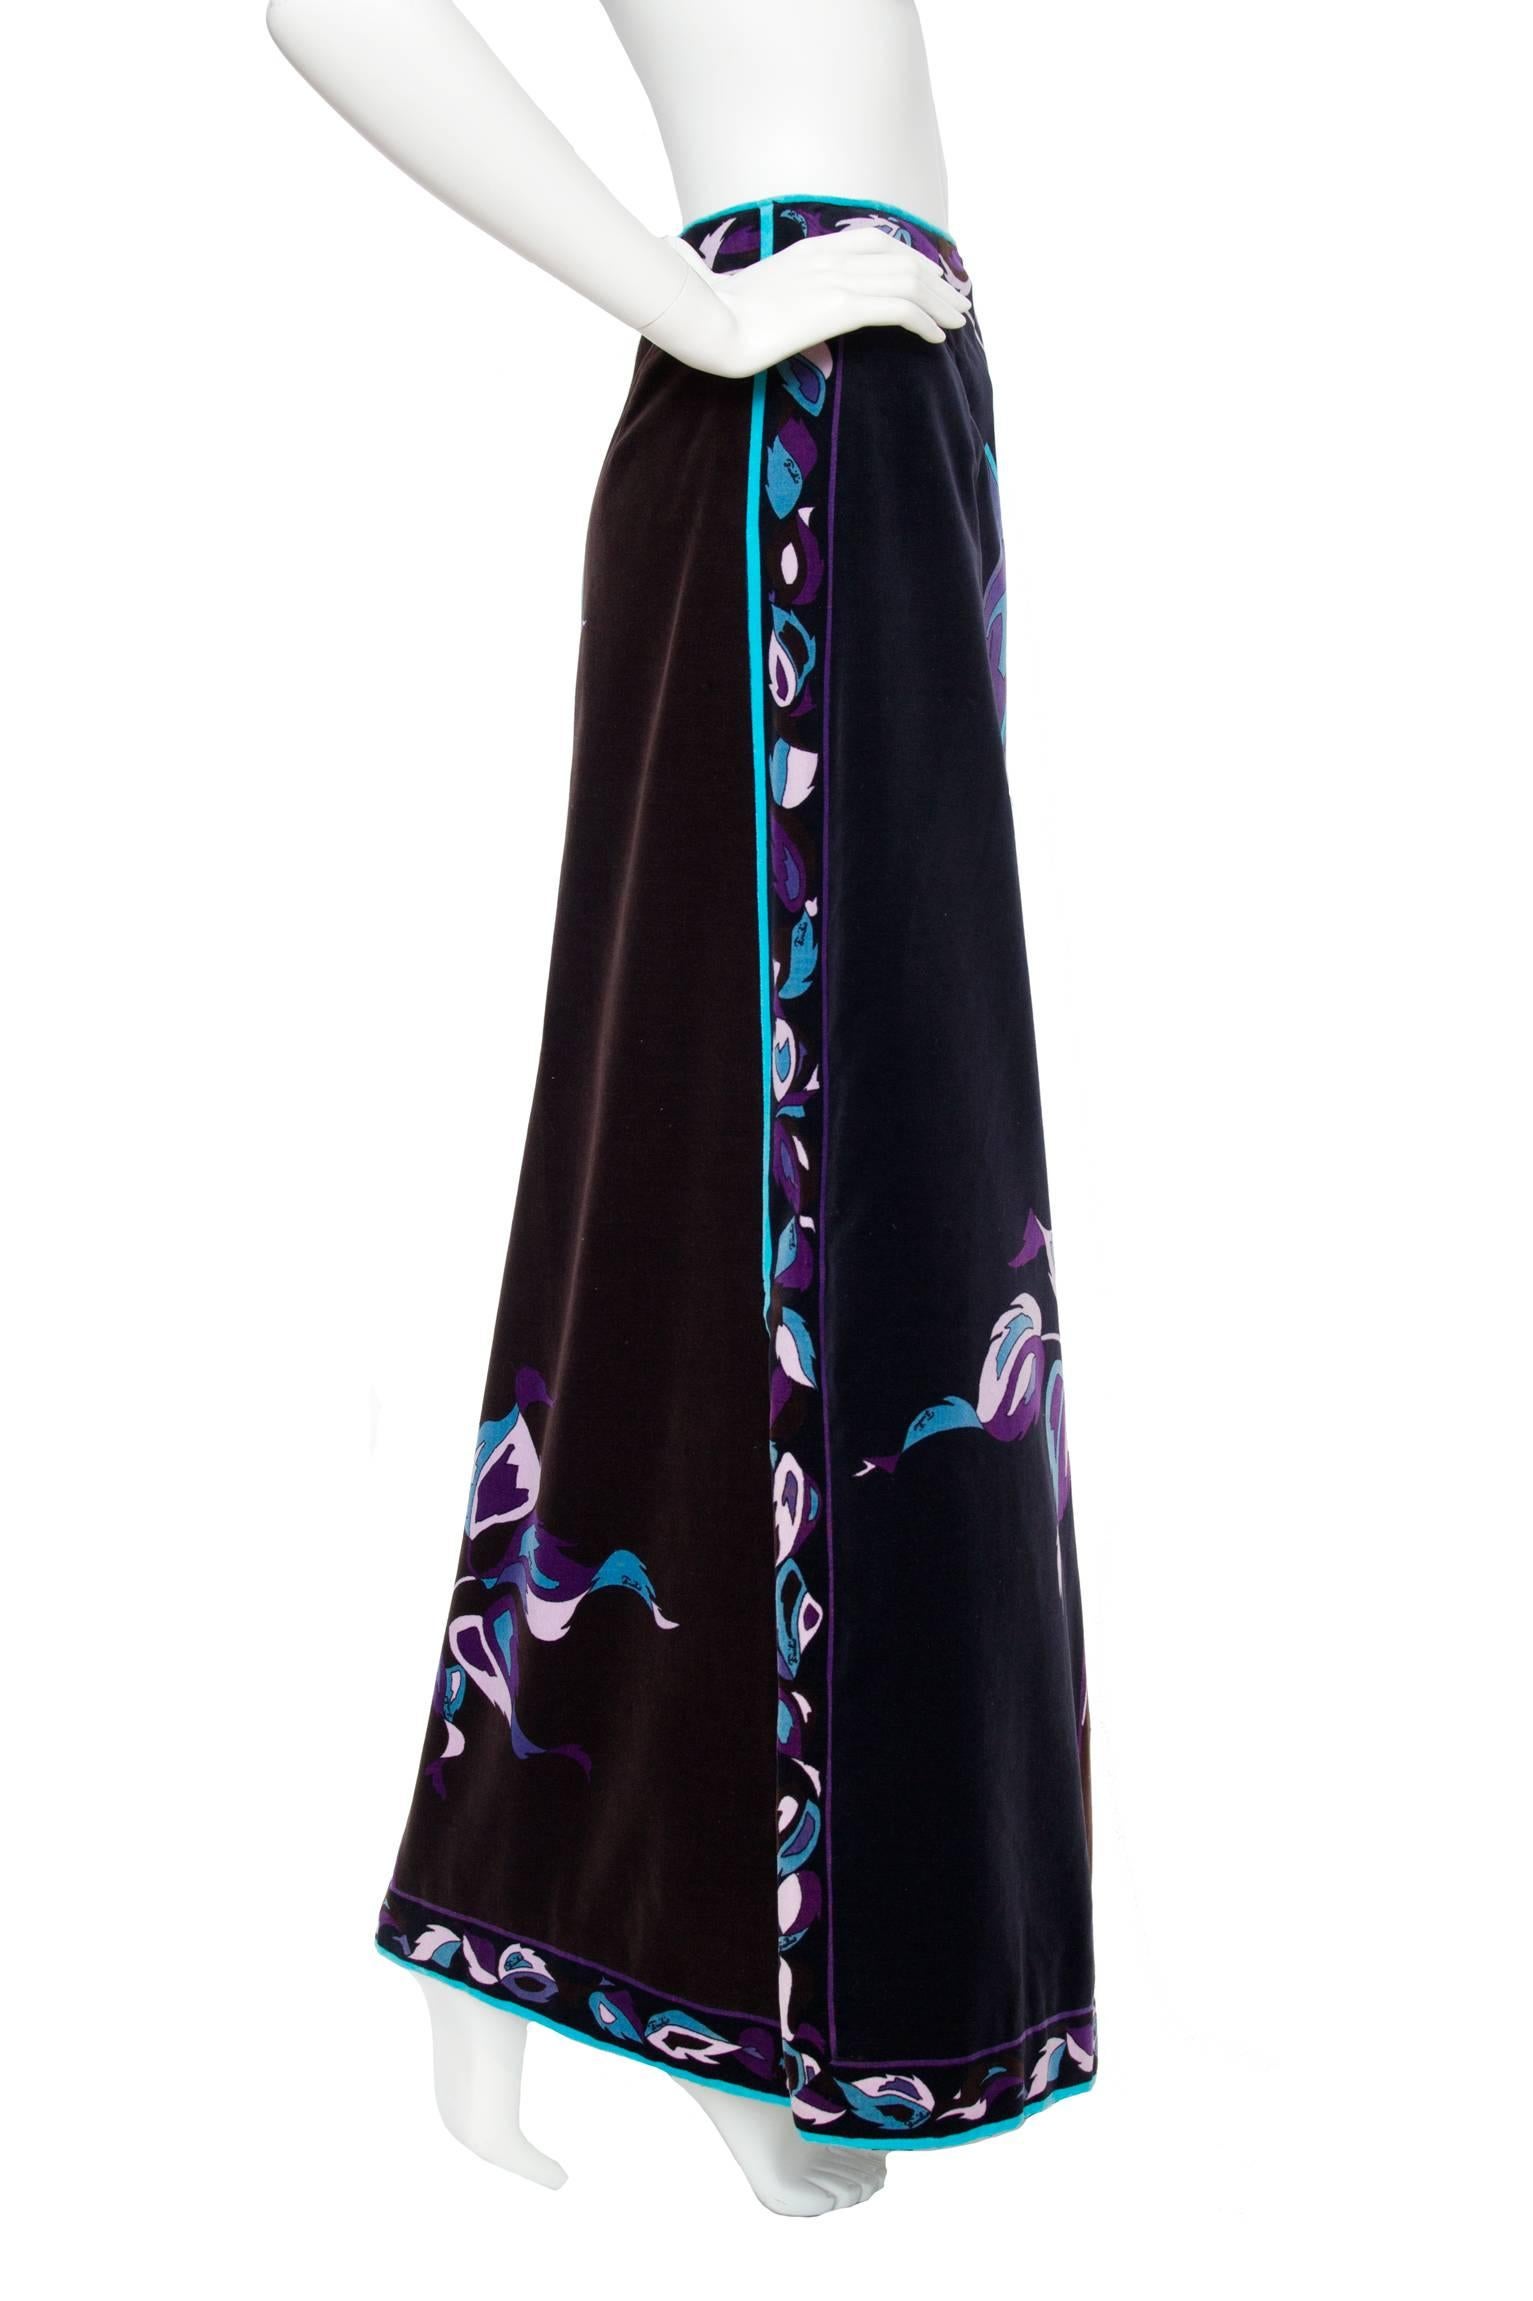 A great 1970s Emilio Pucci floor-length velvet skirt with a characteristic abstract floral print. The print is held in complimenting hues of blue and purple which sets beautifully on a black and brown background. The skirt is fully lined and can be